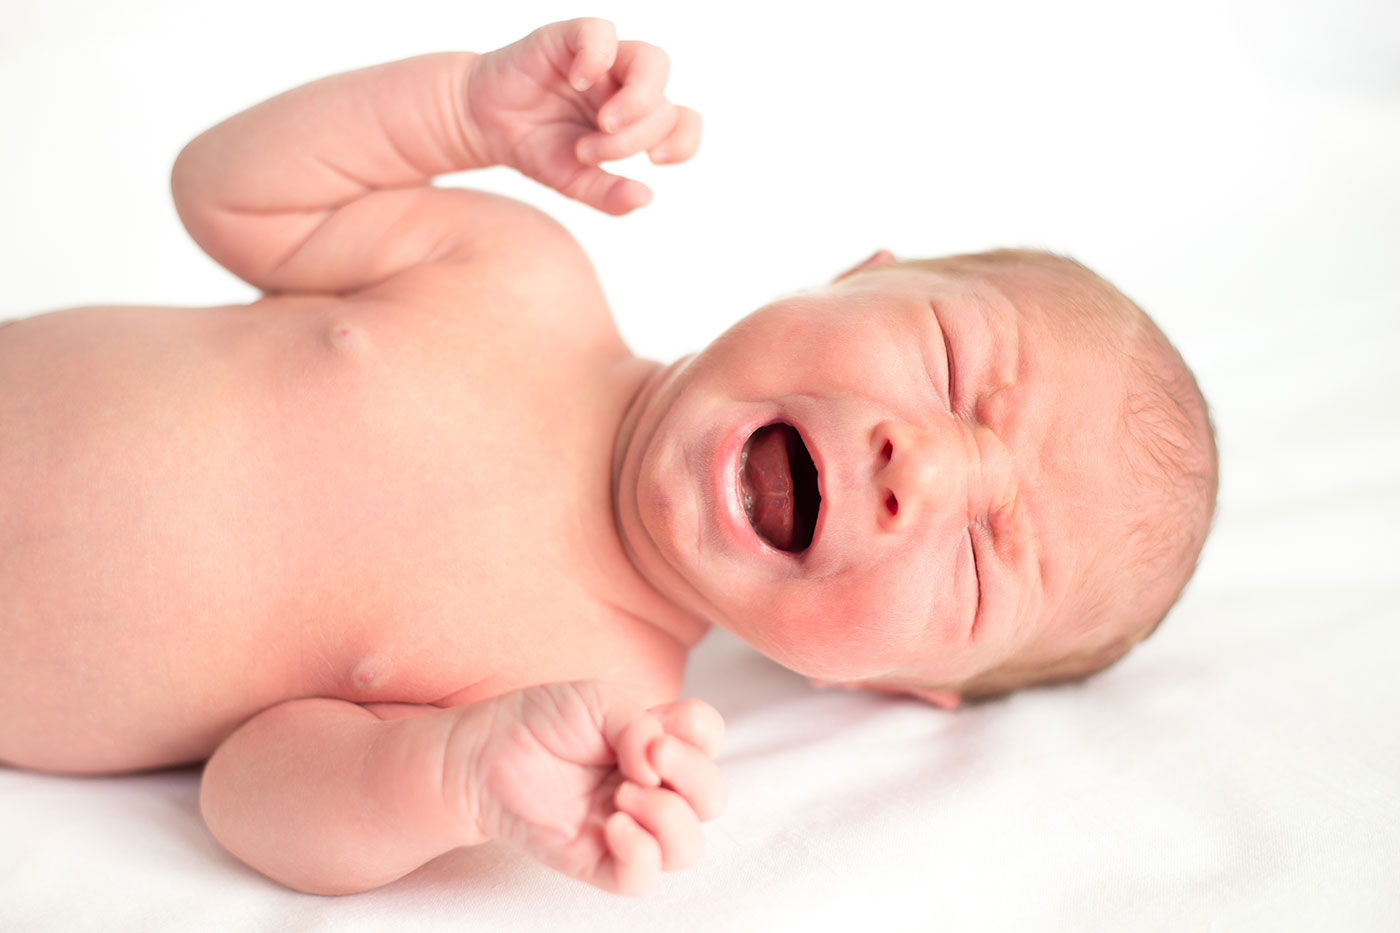 Newborn Constantly Hungry and Crying